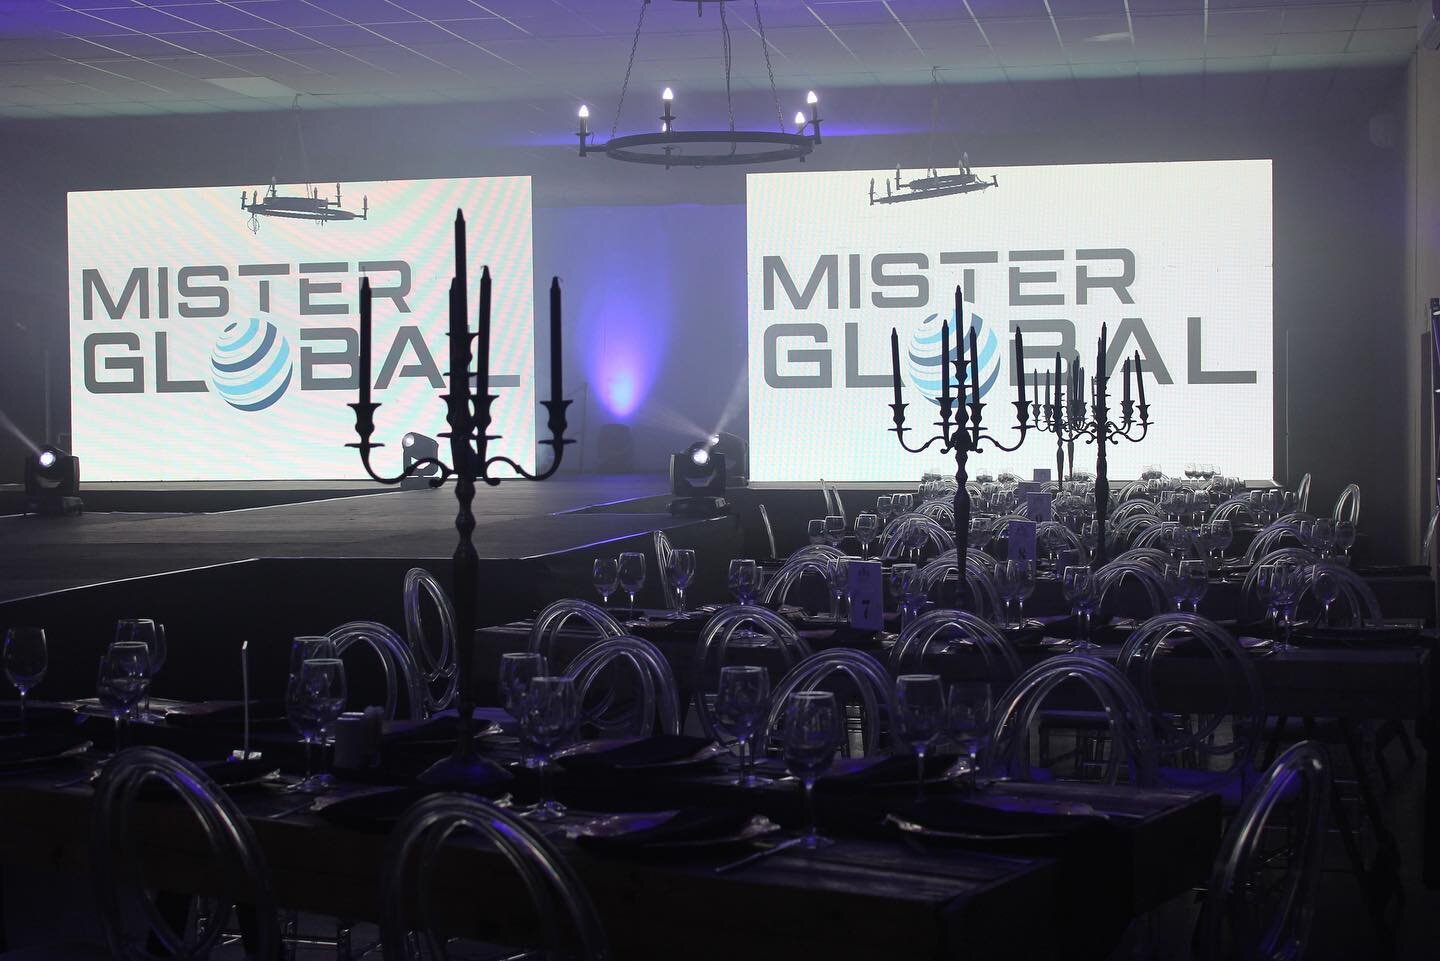 Mister Global SA 2023 @misterglobalsouthafrica Well done EPH on the Runway, Sound, Lightning and LED Screens. Thank you @daniejvr_tollie for the AV. 

Venue @monte_de_dios_venue